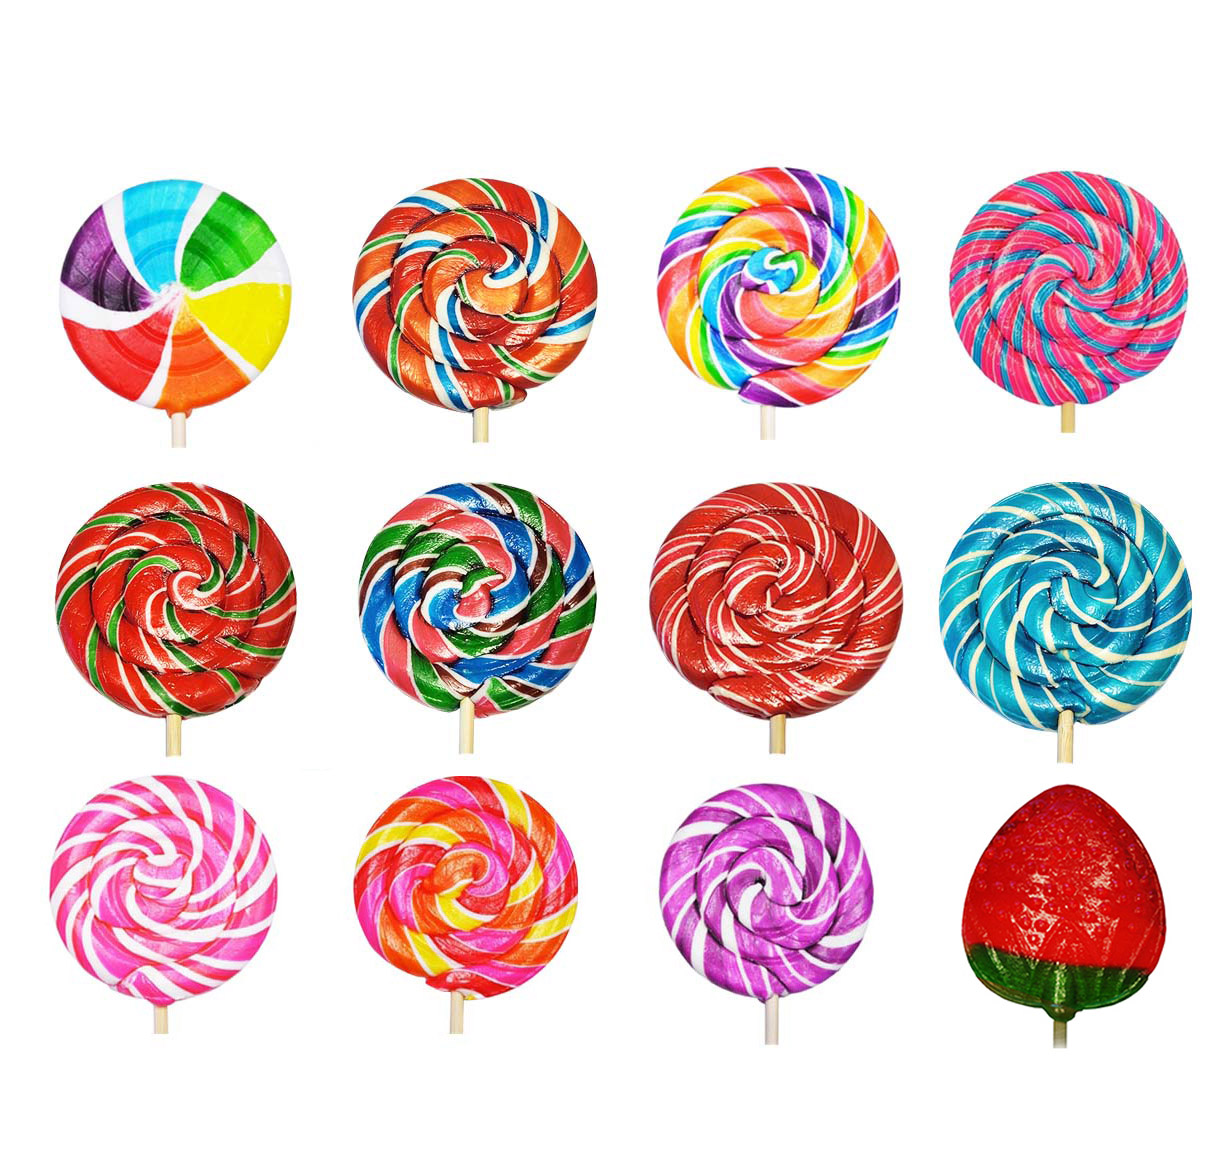 Sweet Whirls with 12 different flavors. NET 65 grams per piece